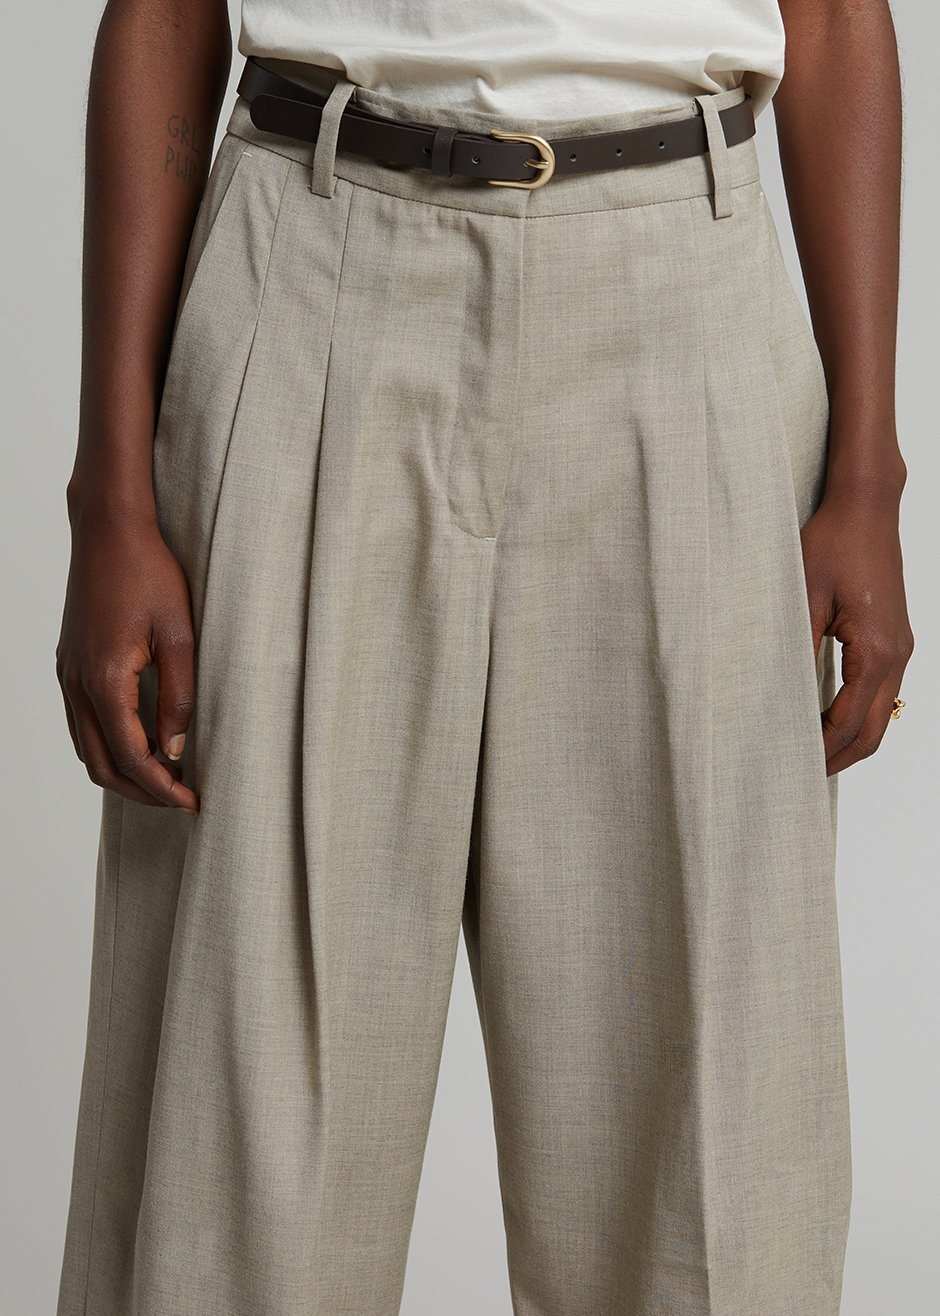 Gelso Pleated Trousers - Light Taupe Melange - 8